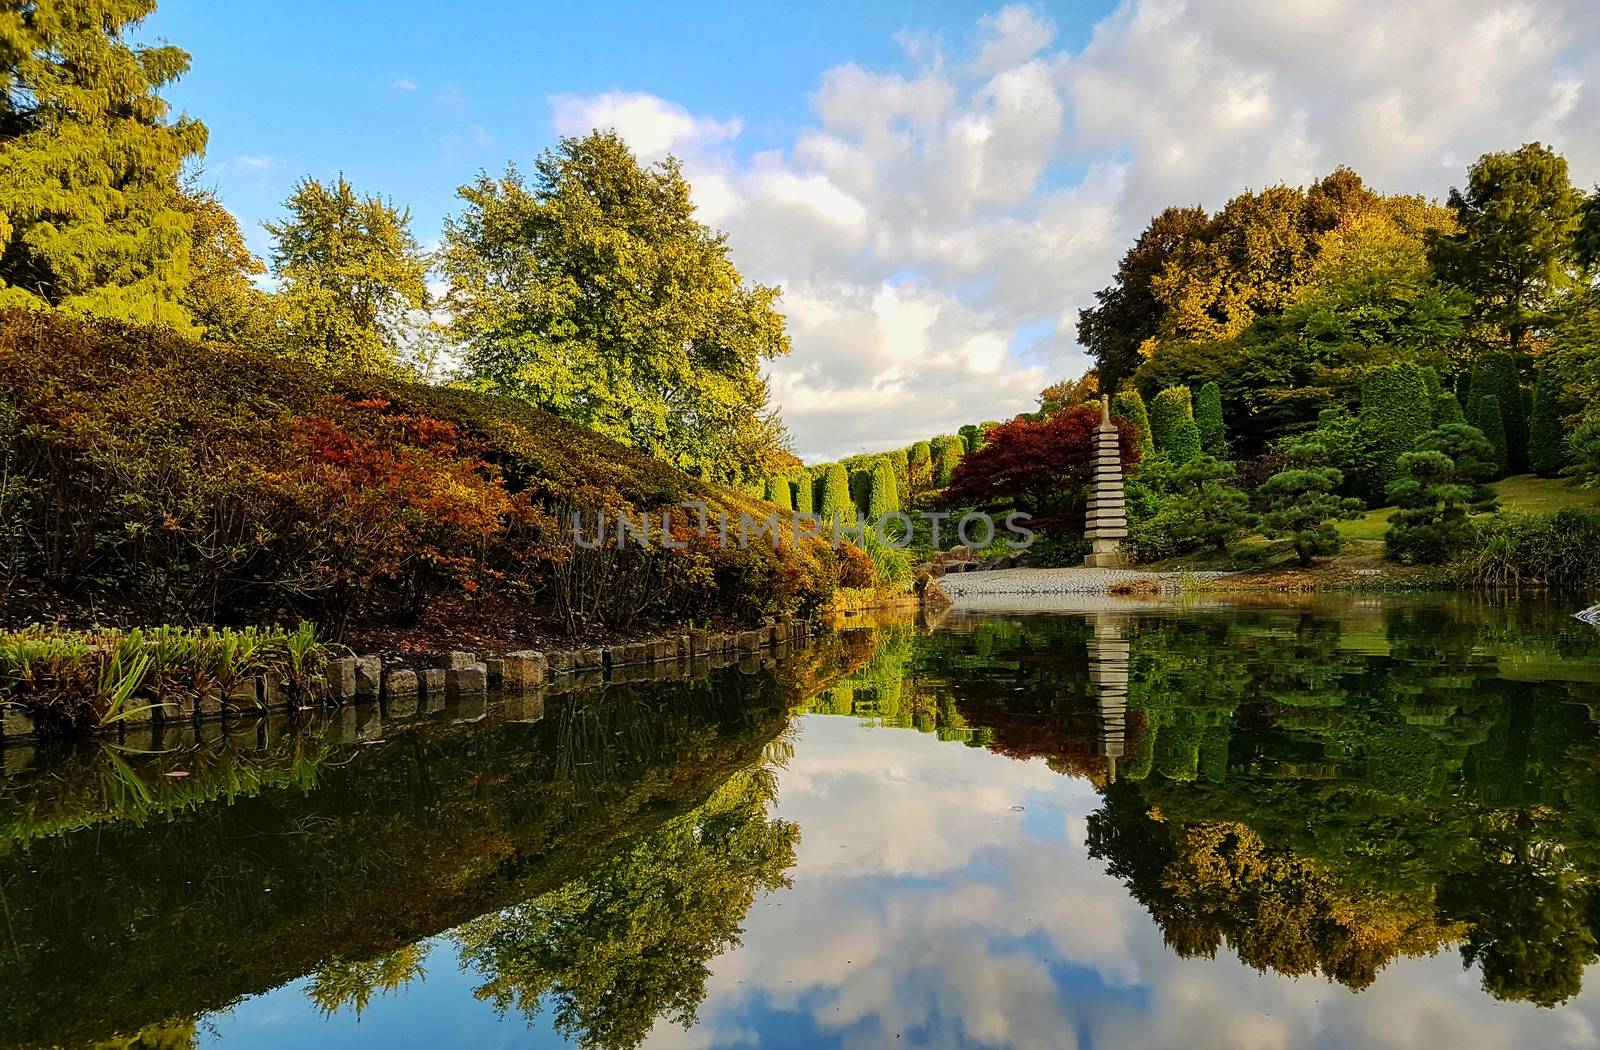 Beautiful image reflection in a Japanese garden by Mendelex